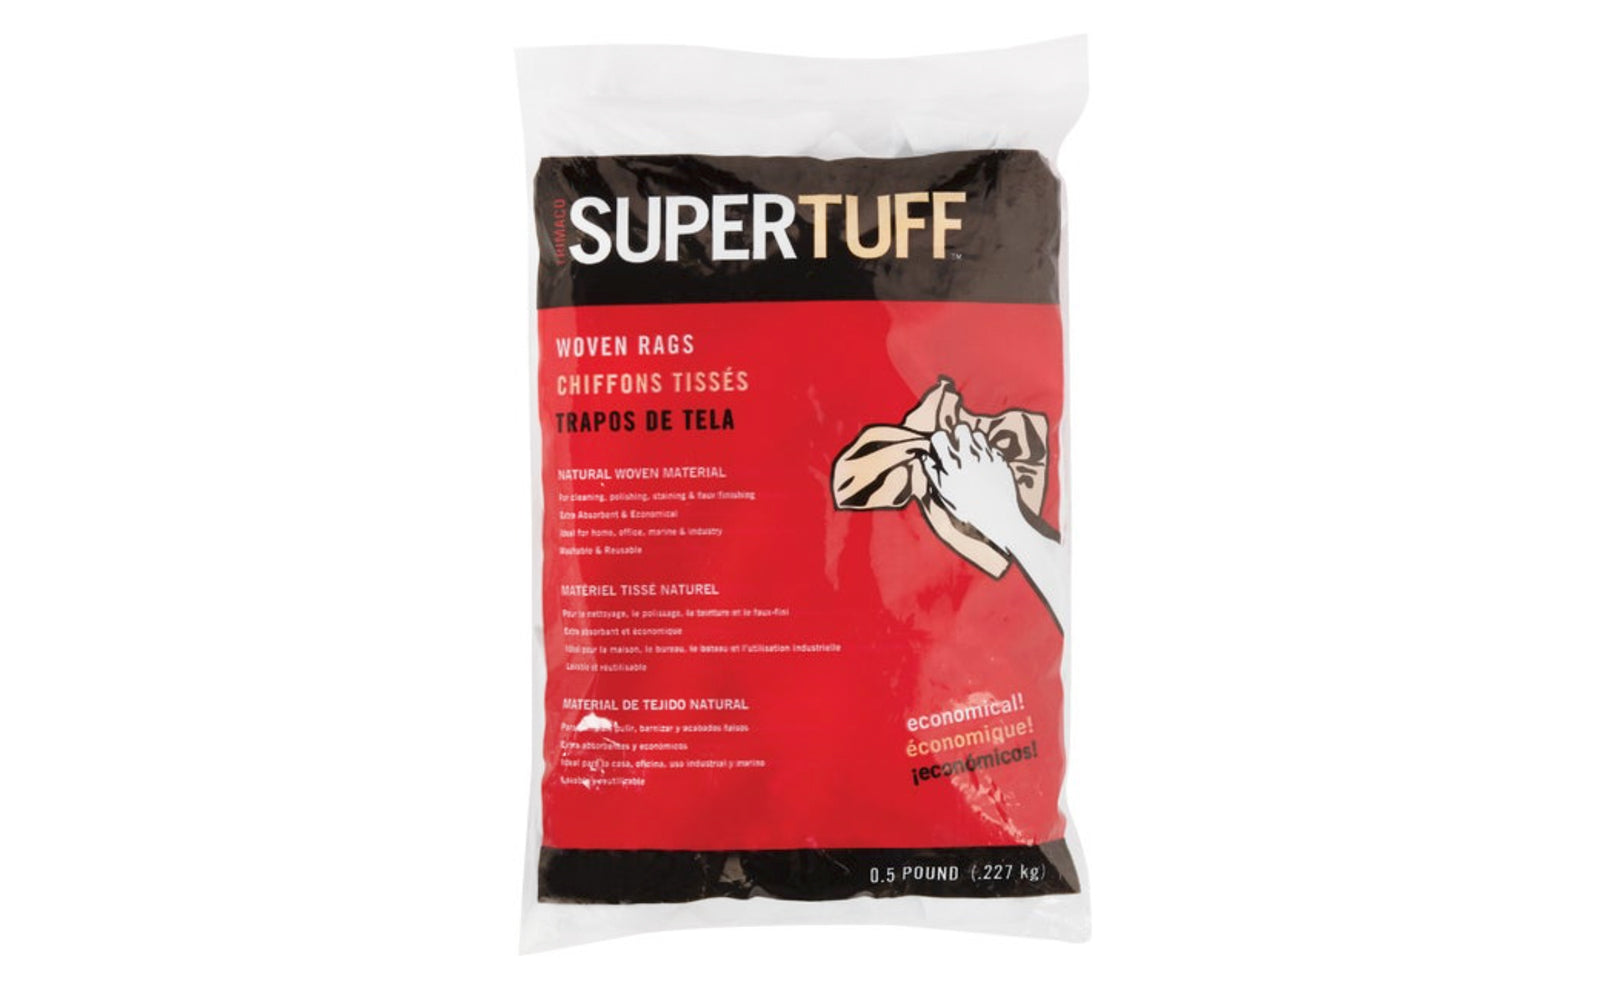 These natural woven material rags are ideal for use in the workshop, marine environment, industrial use, garage, home & office. Great for staining, polishing, faux finishing, cleaning, etc. The rags are washable & reusable. "SuperTuff" rags by Trimaco Model 10841. 1/2 lb bag. 8 oz. 047034108418